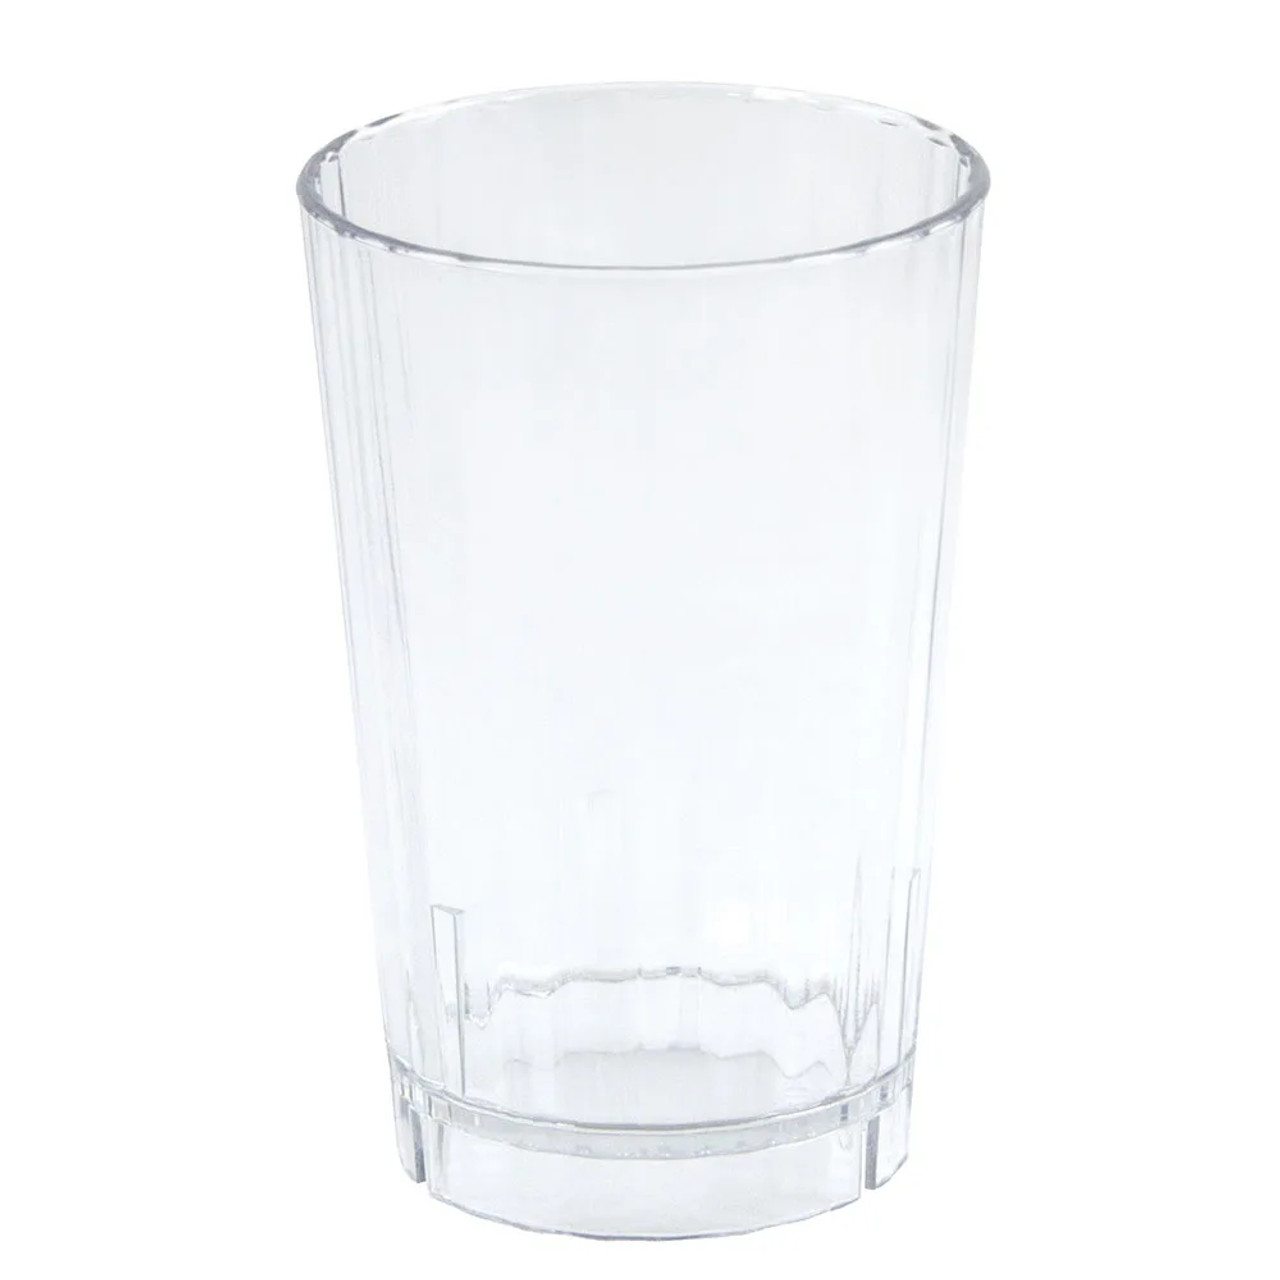 Cambro 14 oz Clear Plastic Tumbler (36/Case) - Durable, Glass-Like Drinkware - Chicken Pieces